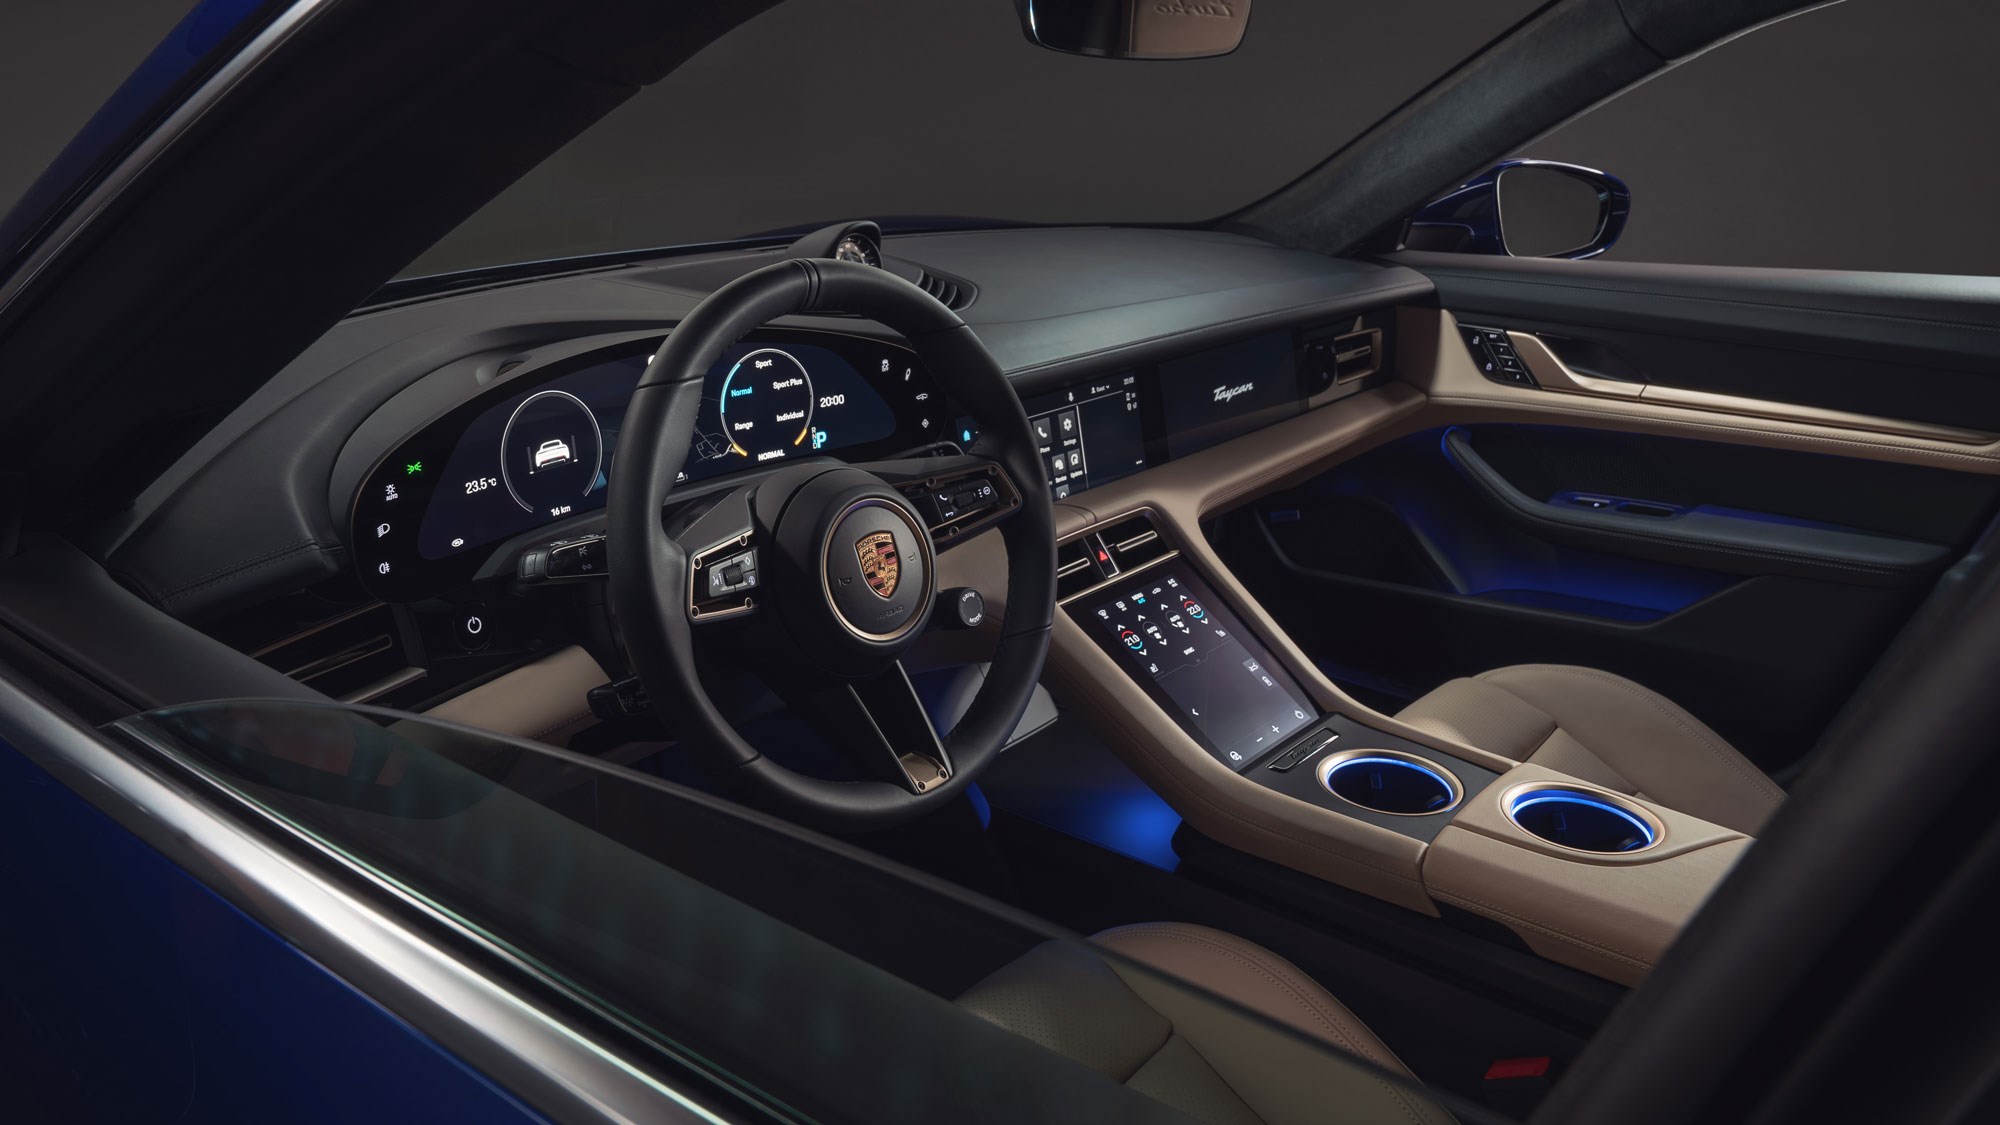 Porsche Taycan Specs Pricing And More On New High Tech